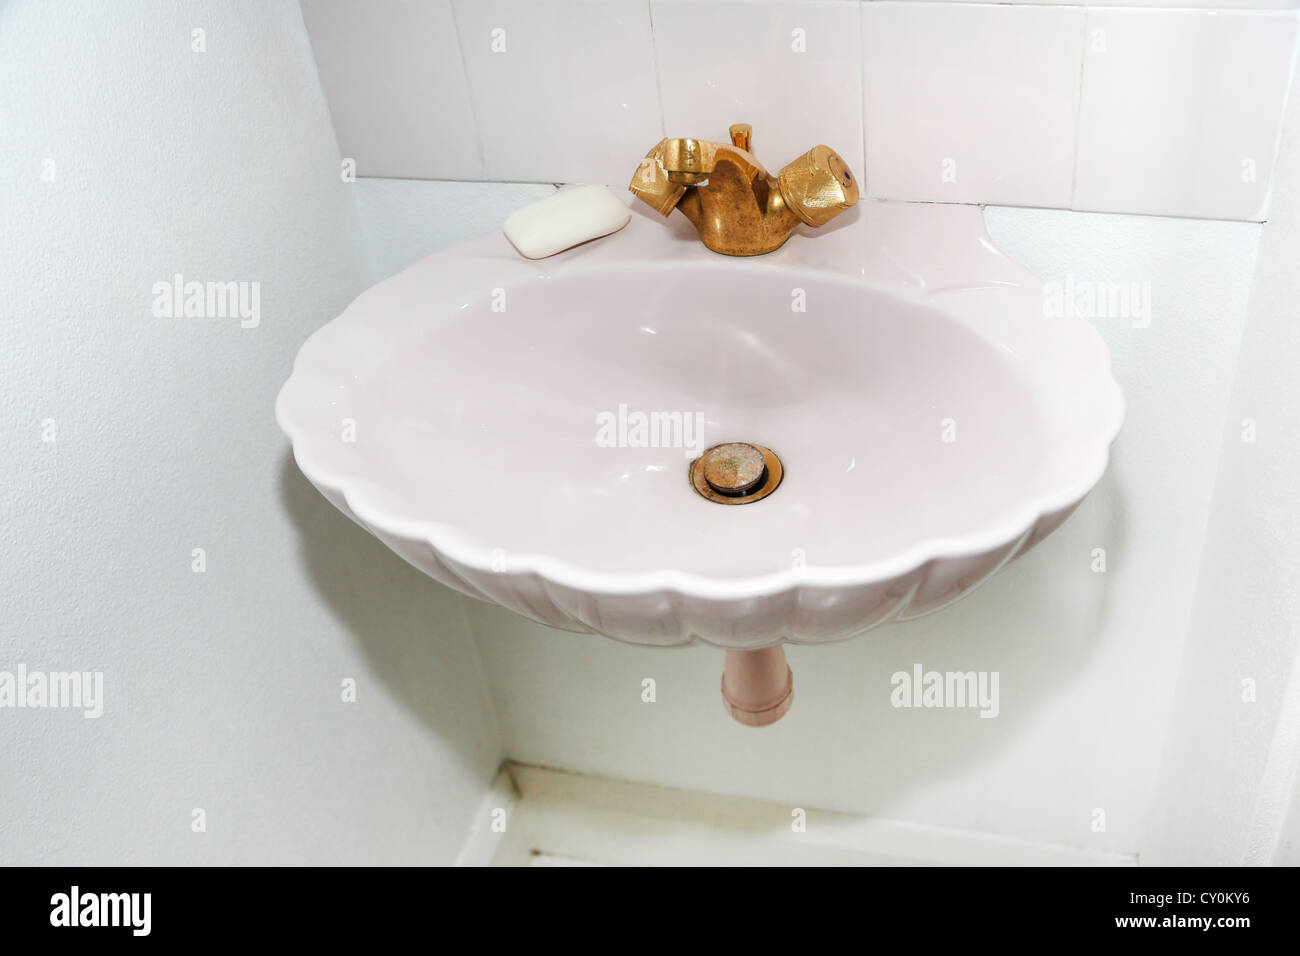 A Washbasin With Two Taps Hot And Cold Stock Photo